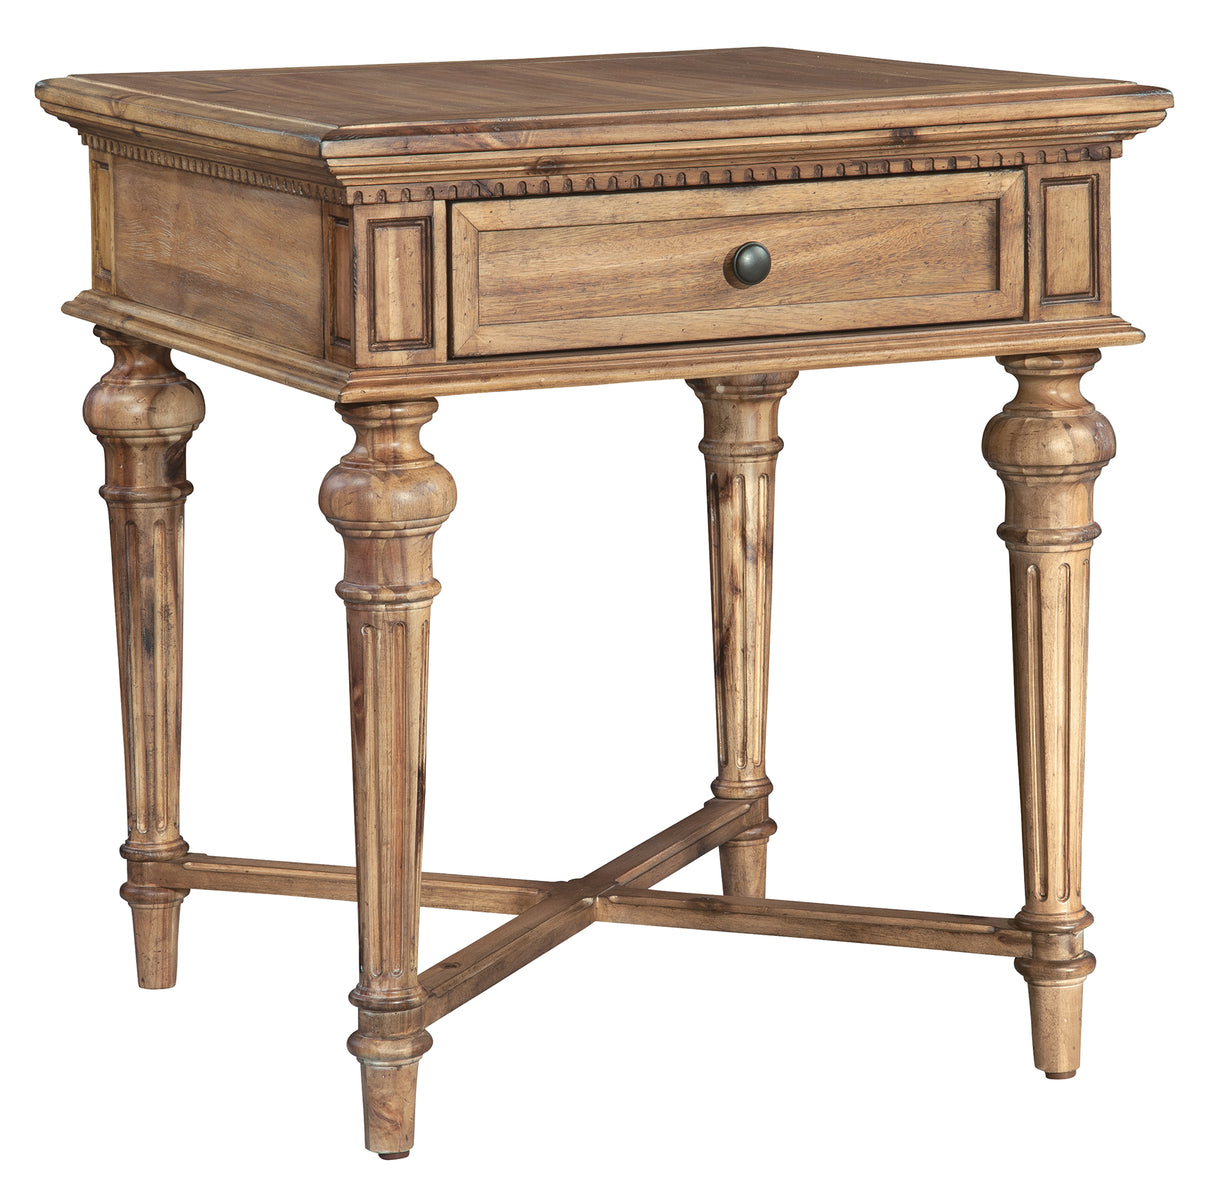 Hekman 23304 Wellington Hall 24.25in. x 26.25in. x 26.25in. End Table